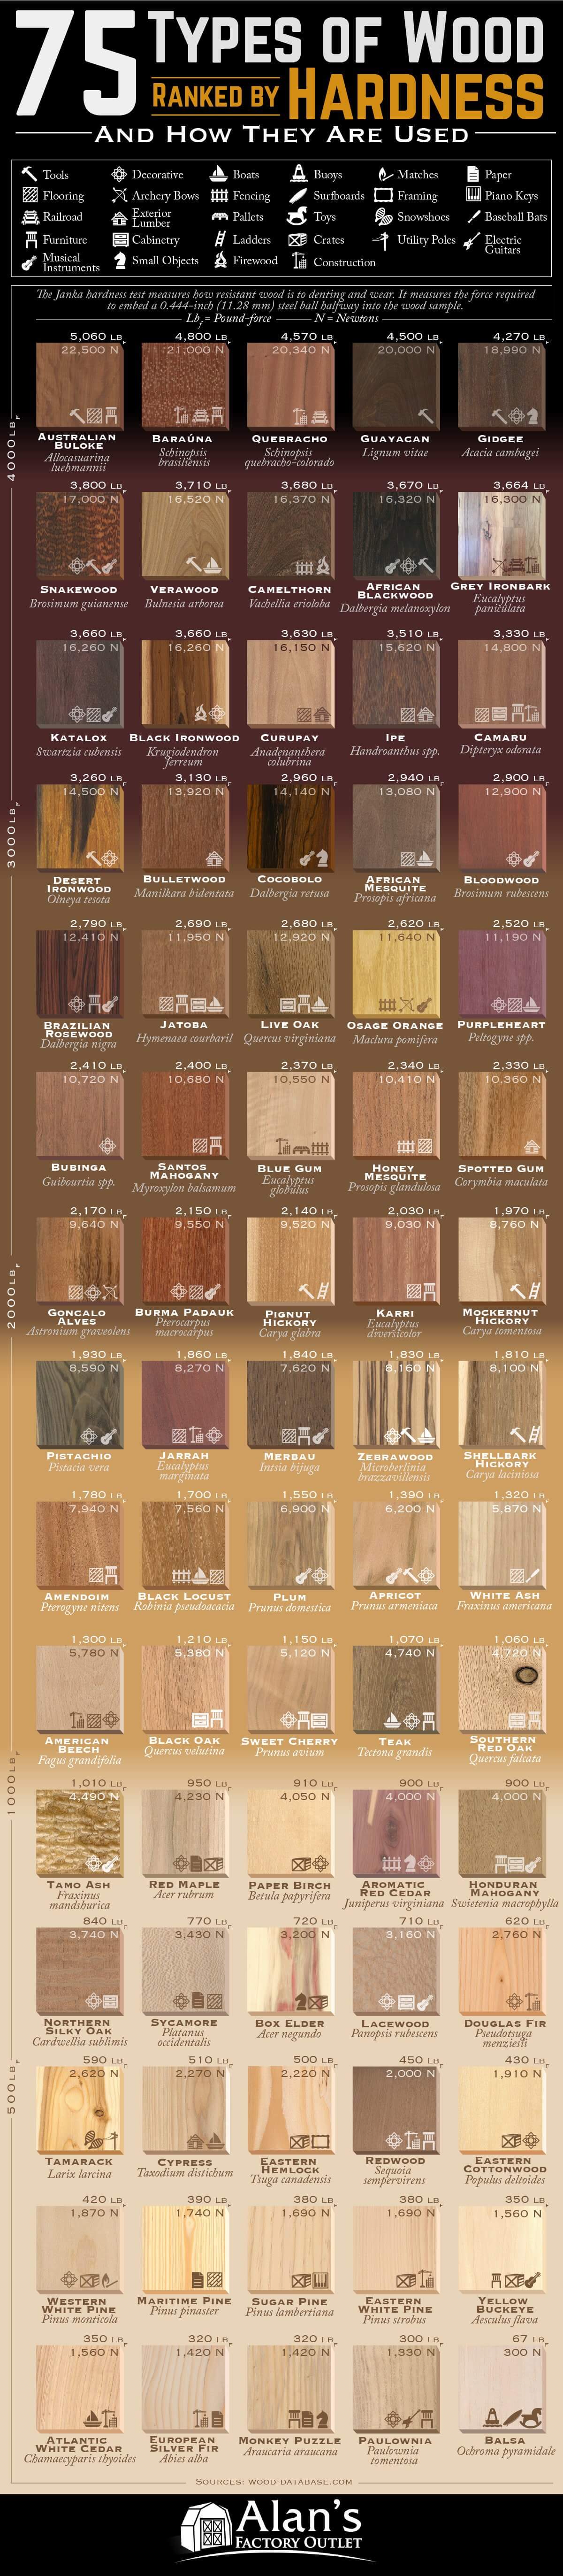 75 types of wood ranked by janka hardness